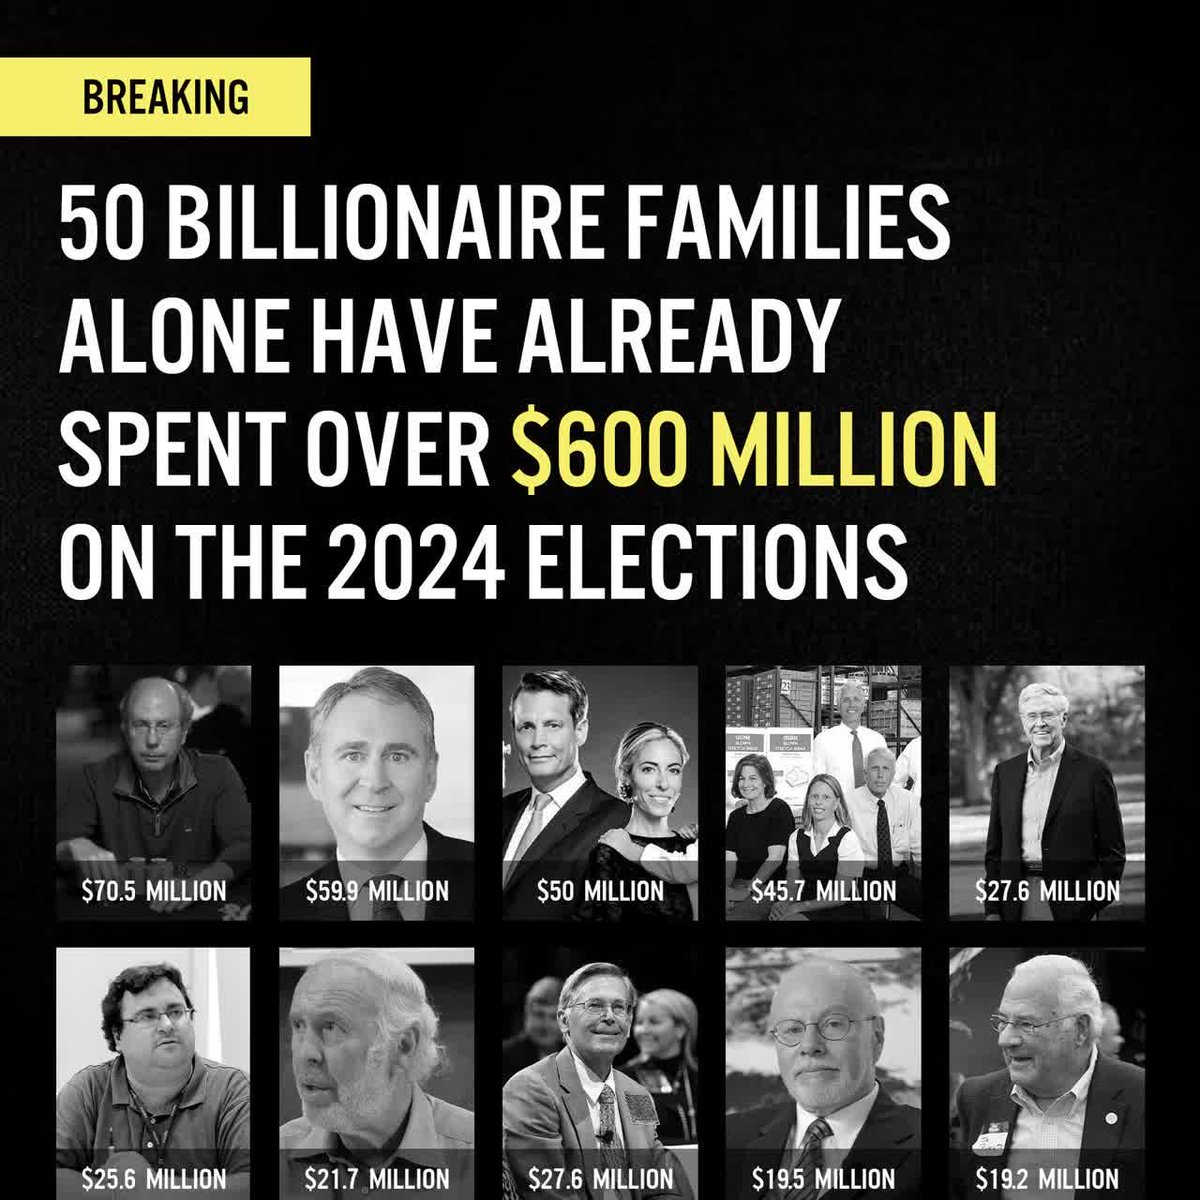 THIS JUST IN: Our billionaire overlords are trying to purchase politicians who'll cut their taxes. It's a pretty smart investment TBH. We need to tax billionaires and reform our campaign finance system. This is out of control! #ElectionsForSale #ProudBlue #DemsUnited